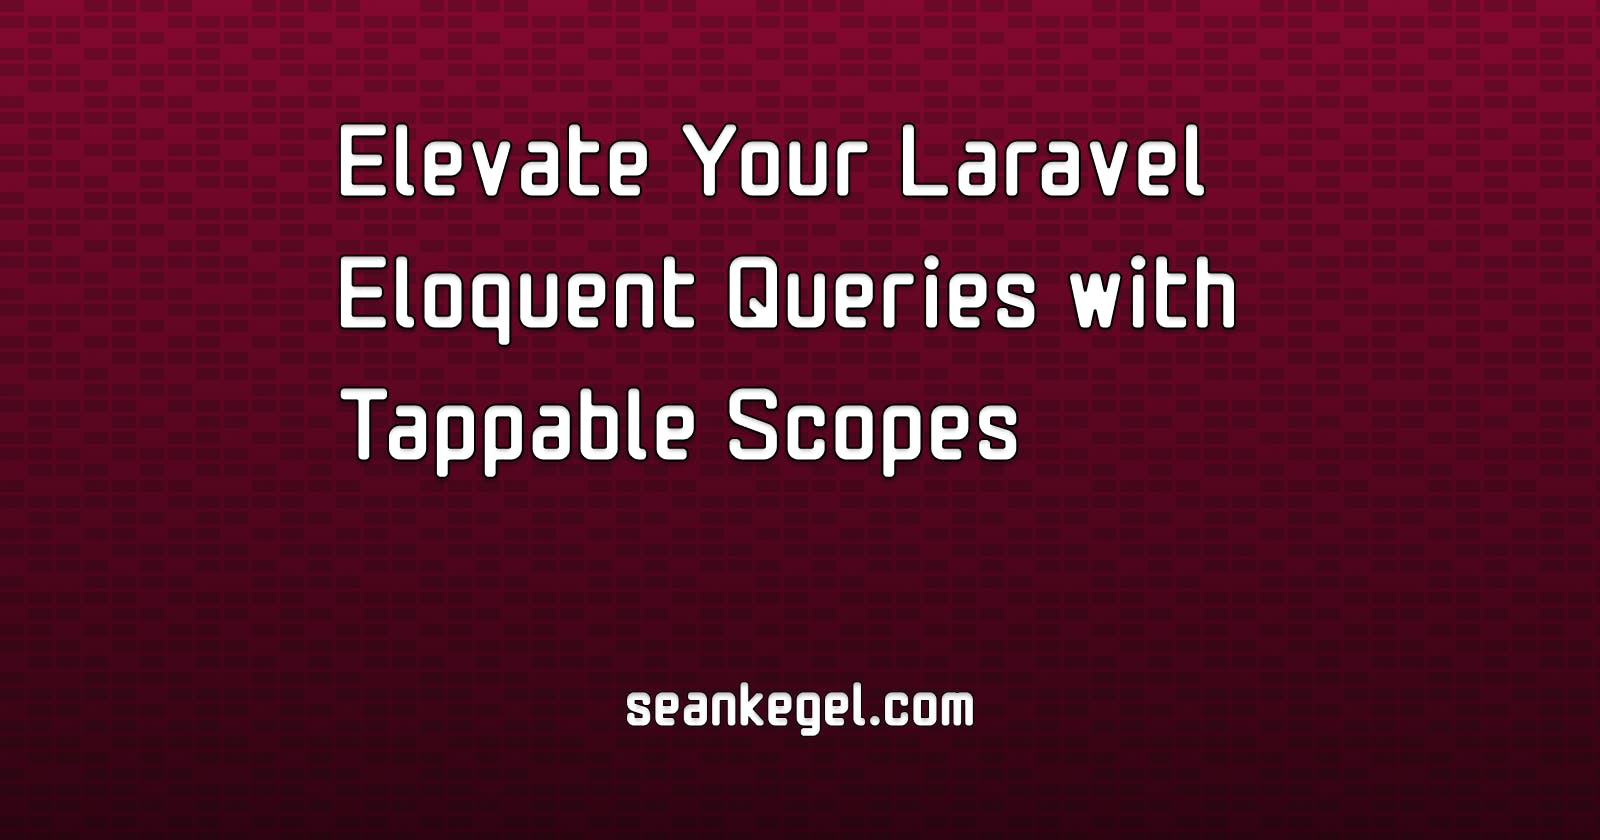 Elevate Your Laravel Eloquent Queries with Tappable Scopes